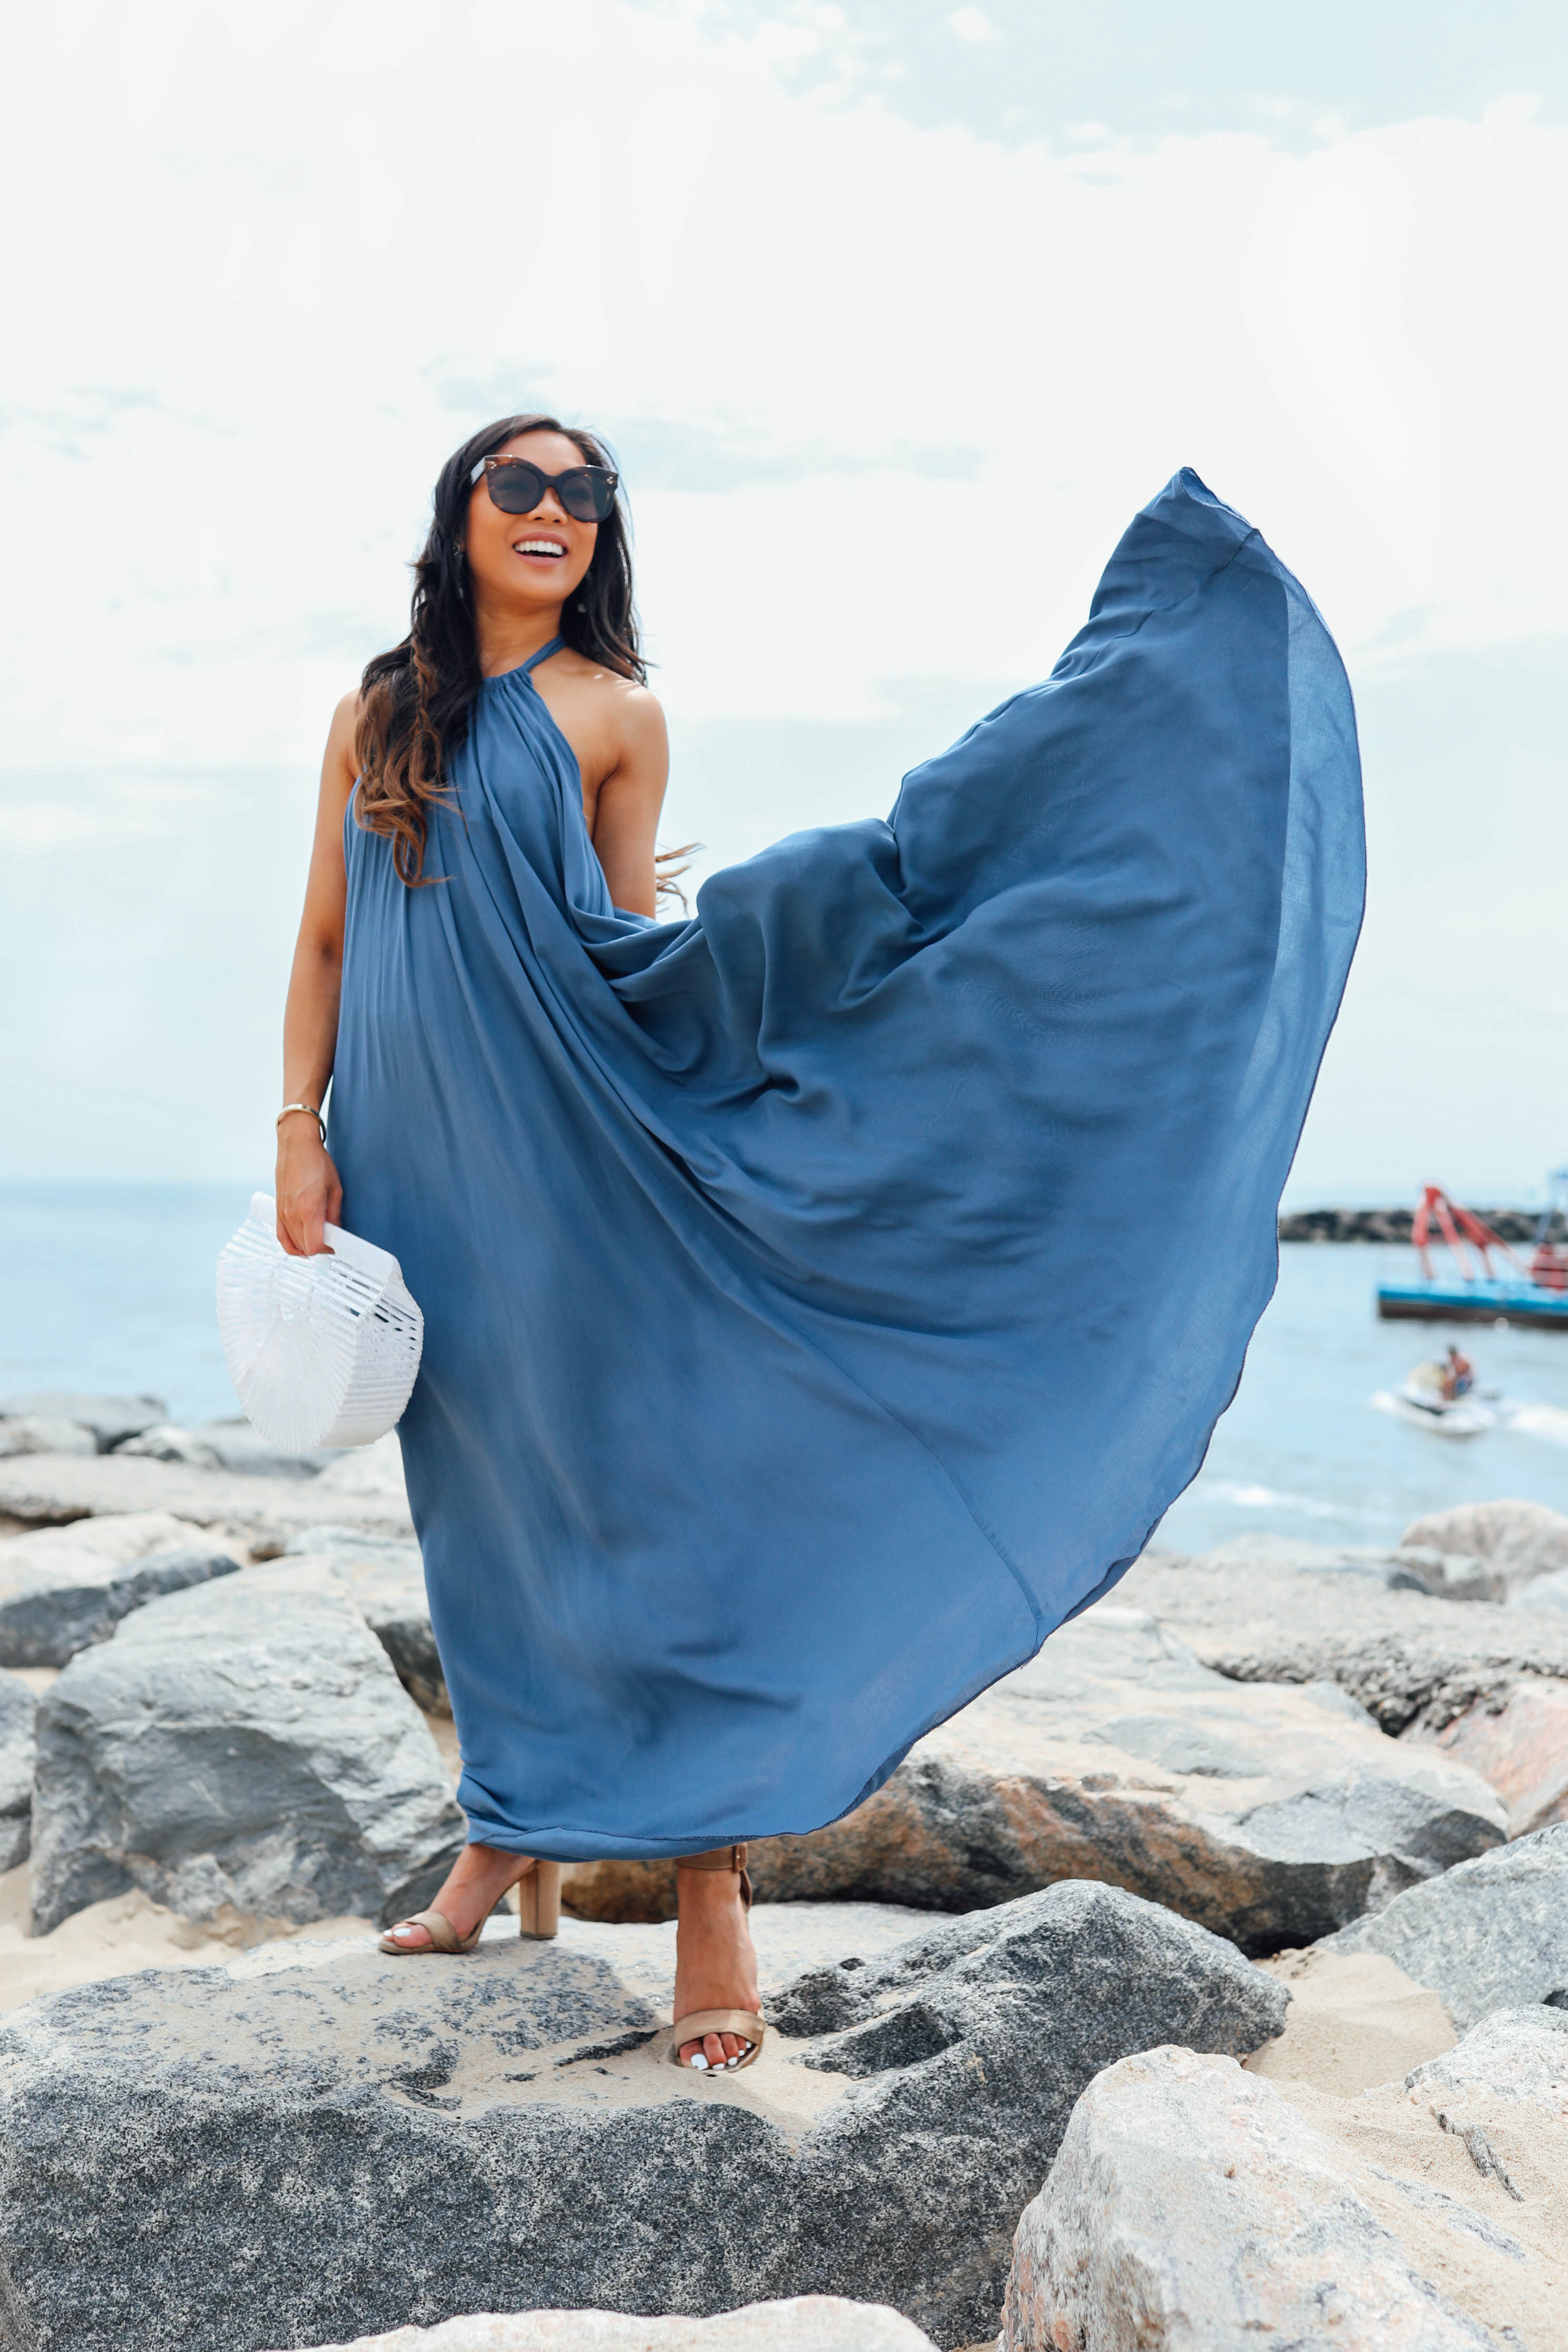 Hoang-Kim of Color & Chic wears a blue maxi dress with Celine glasses in Virginia Beach